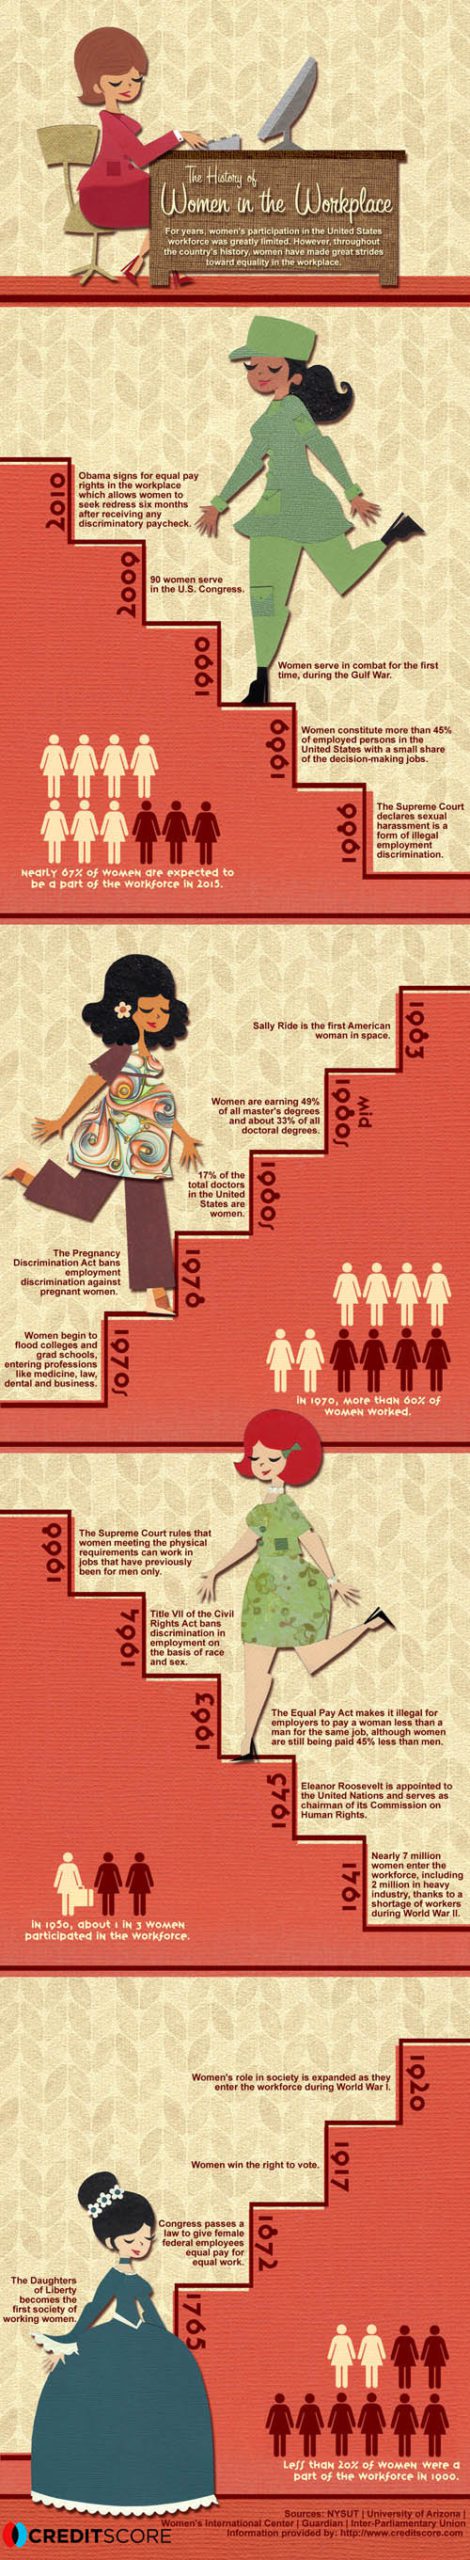 Celebrating The History of Women in the Workplace [Infographic]